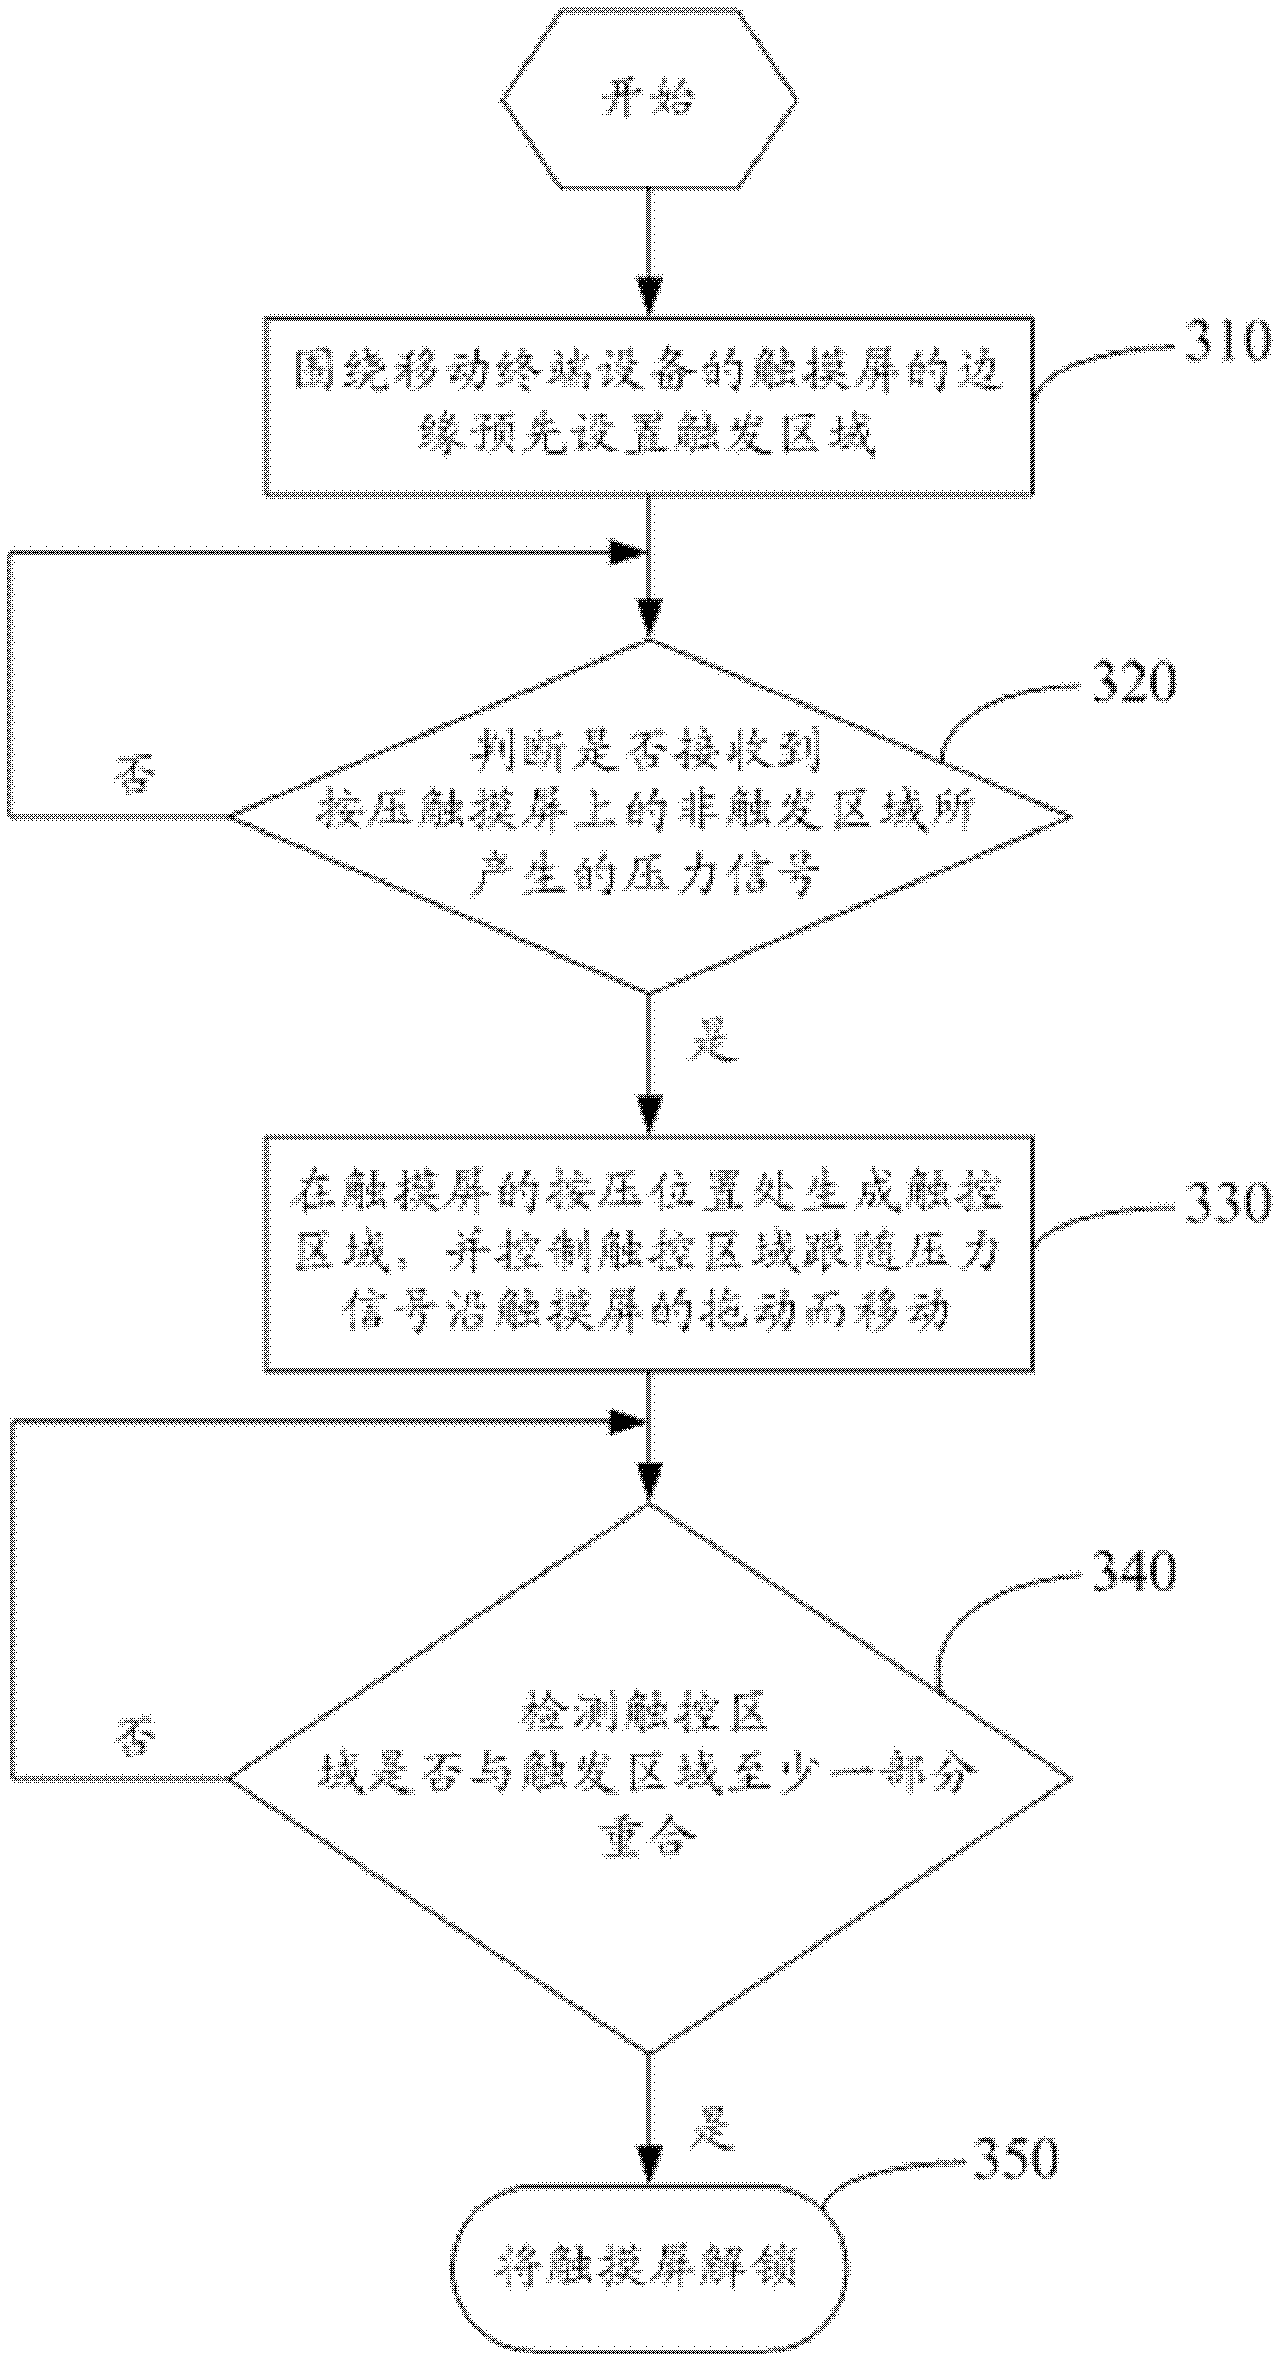 System, method and mobile terminal device for unlocking touch screens